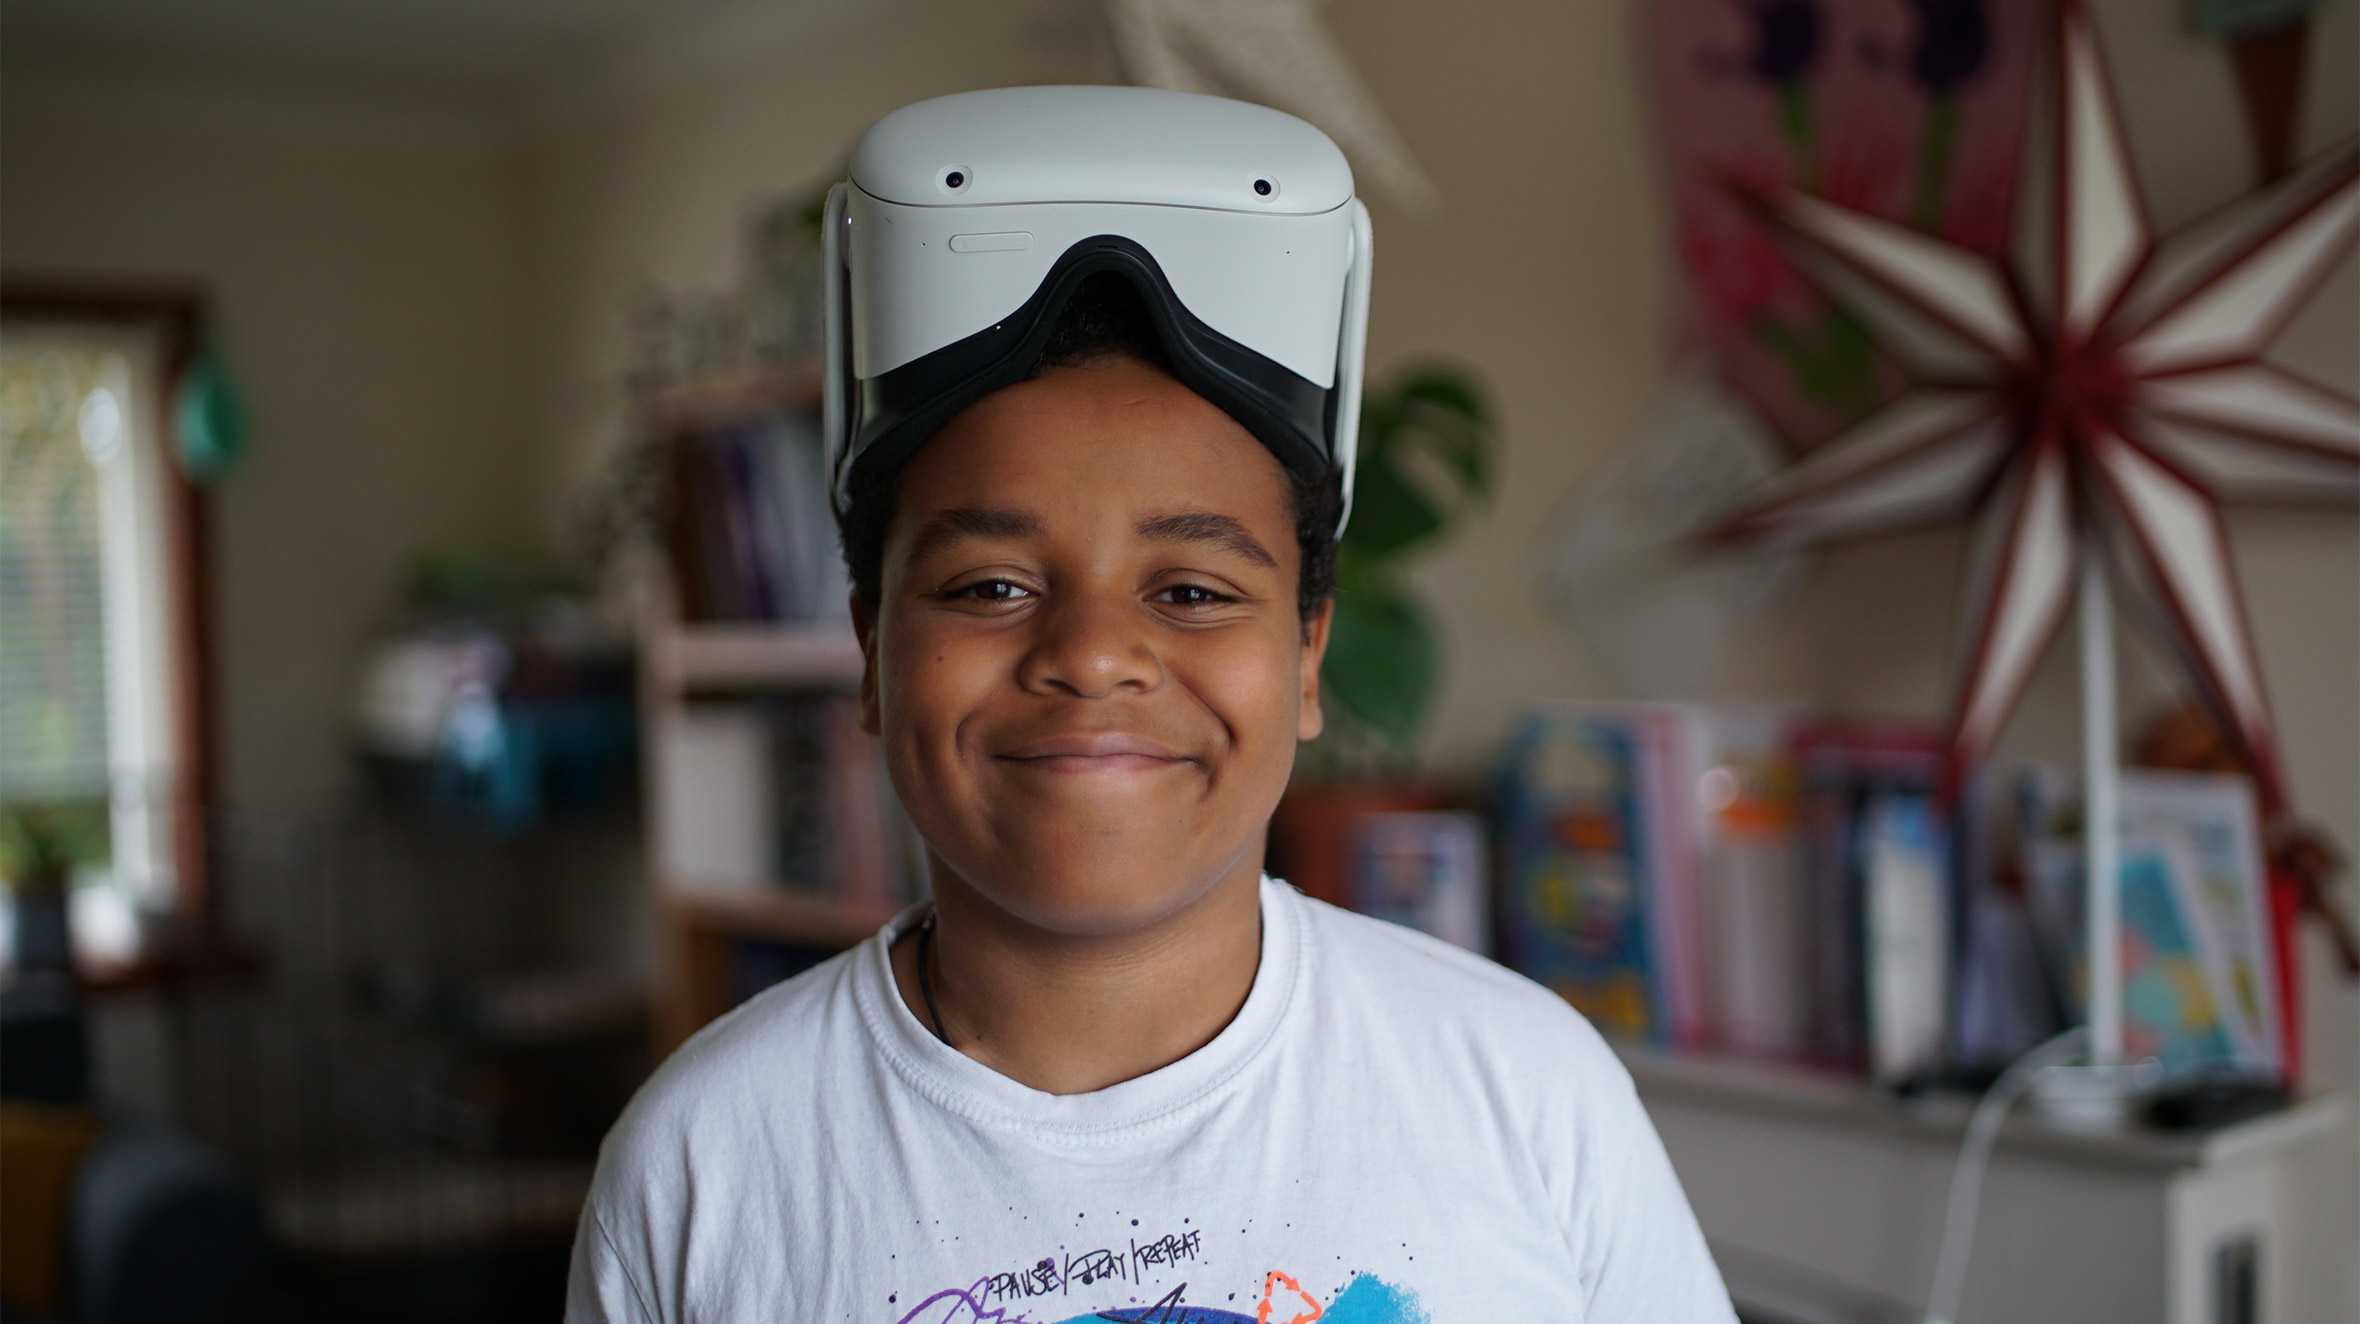 Lukasz, smiling with his VR headset on top of his head.